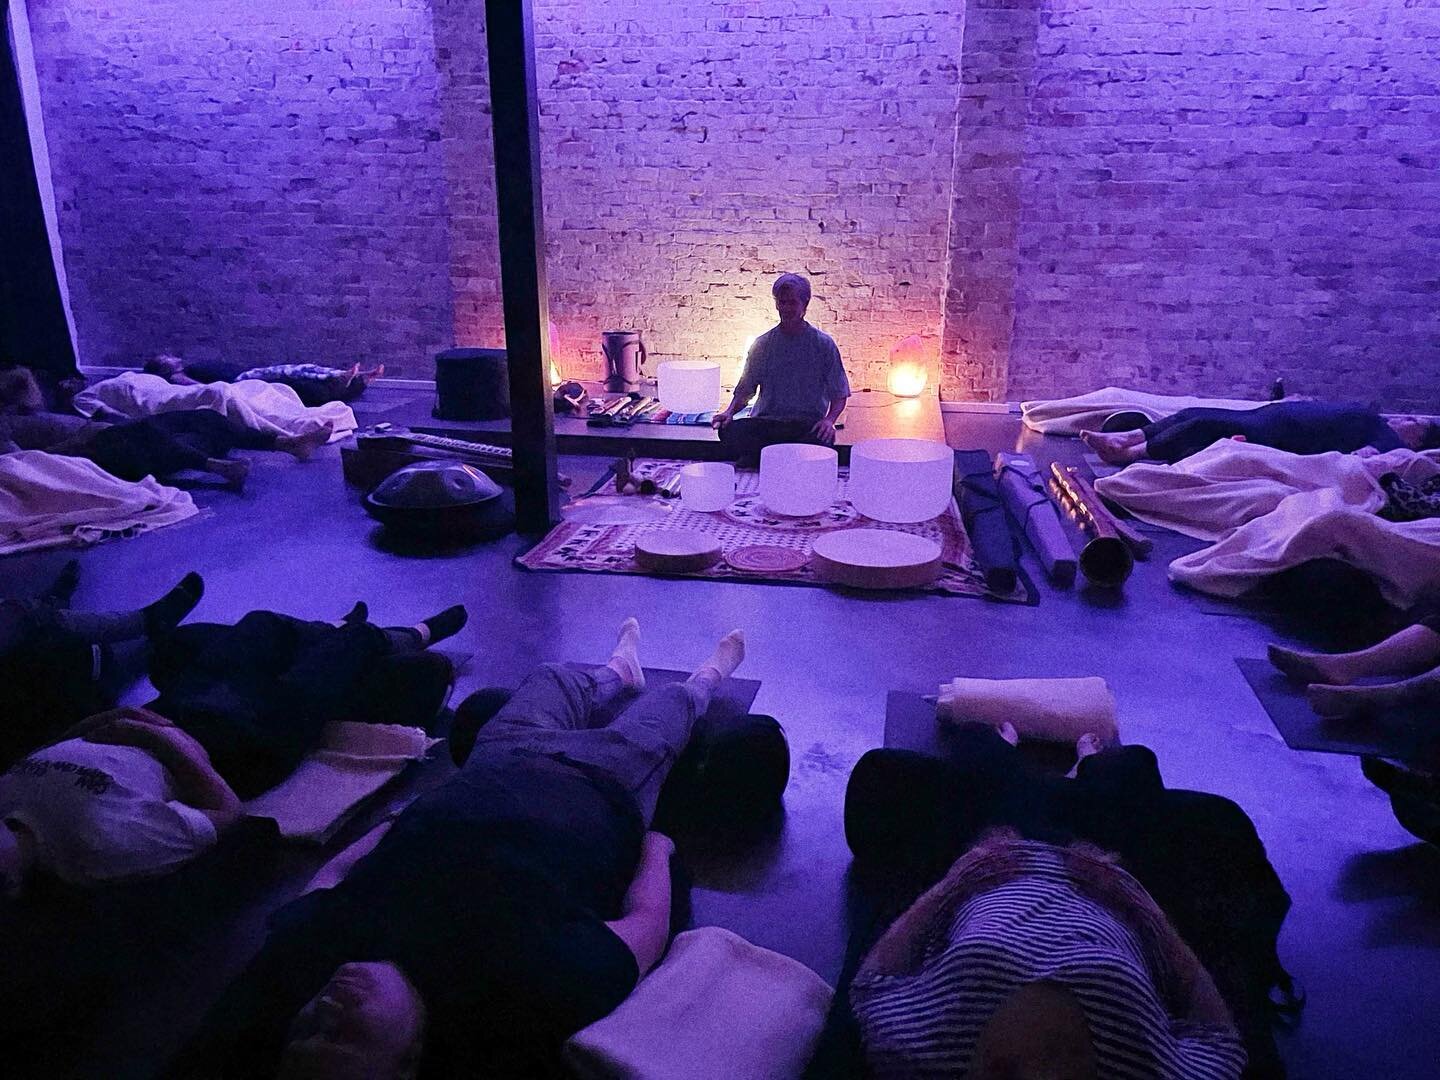 soundhealing is on this Friday, 6.30pm with @sound_alchemy, we offer this restorative and deeply relaxing experience once a month. Tickets available through the website. 
#soundhealing